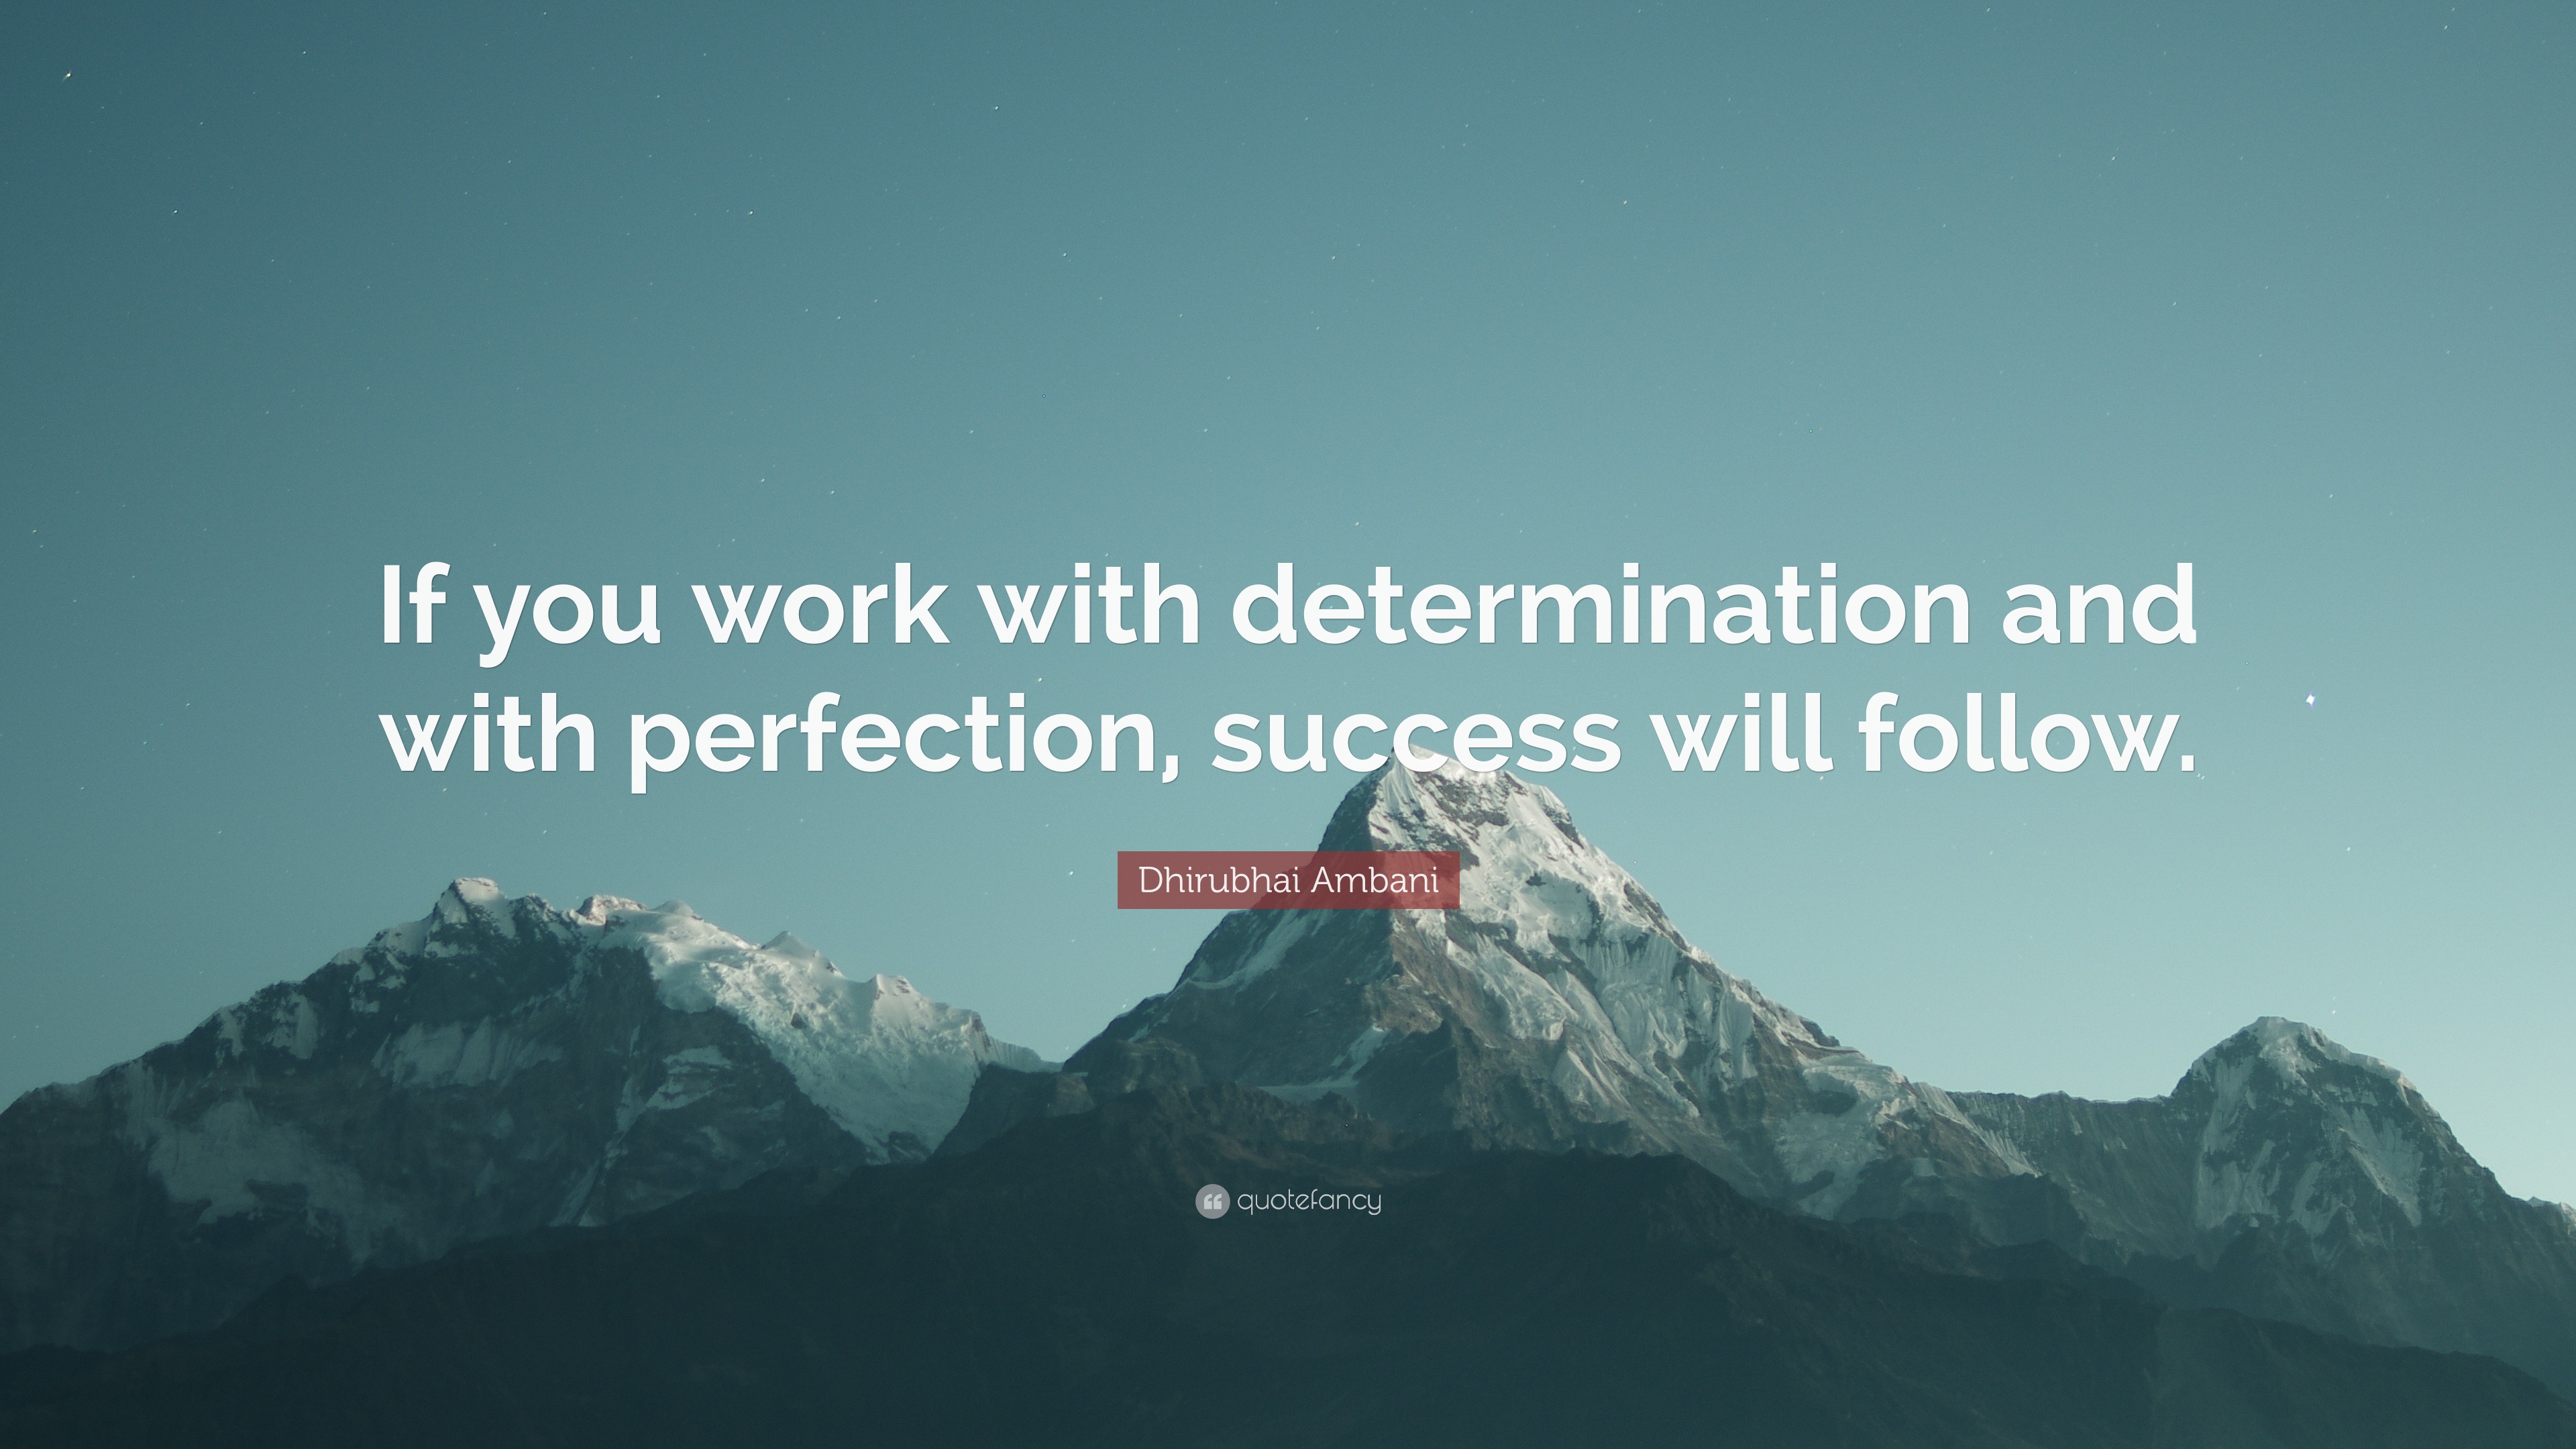 Dhirubhai Ambani Quote: “If you work with determination and with ...